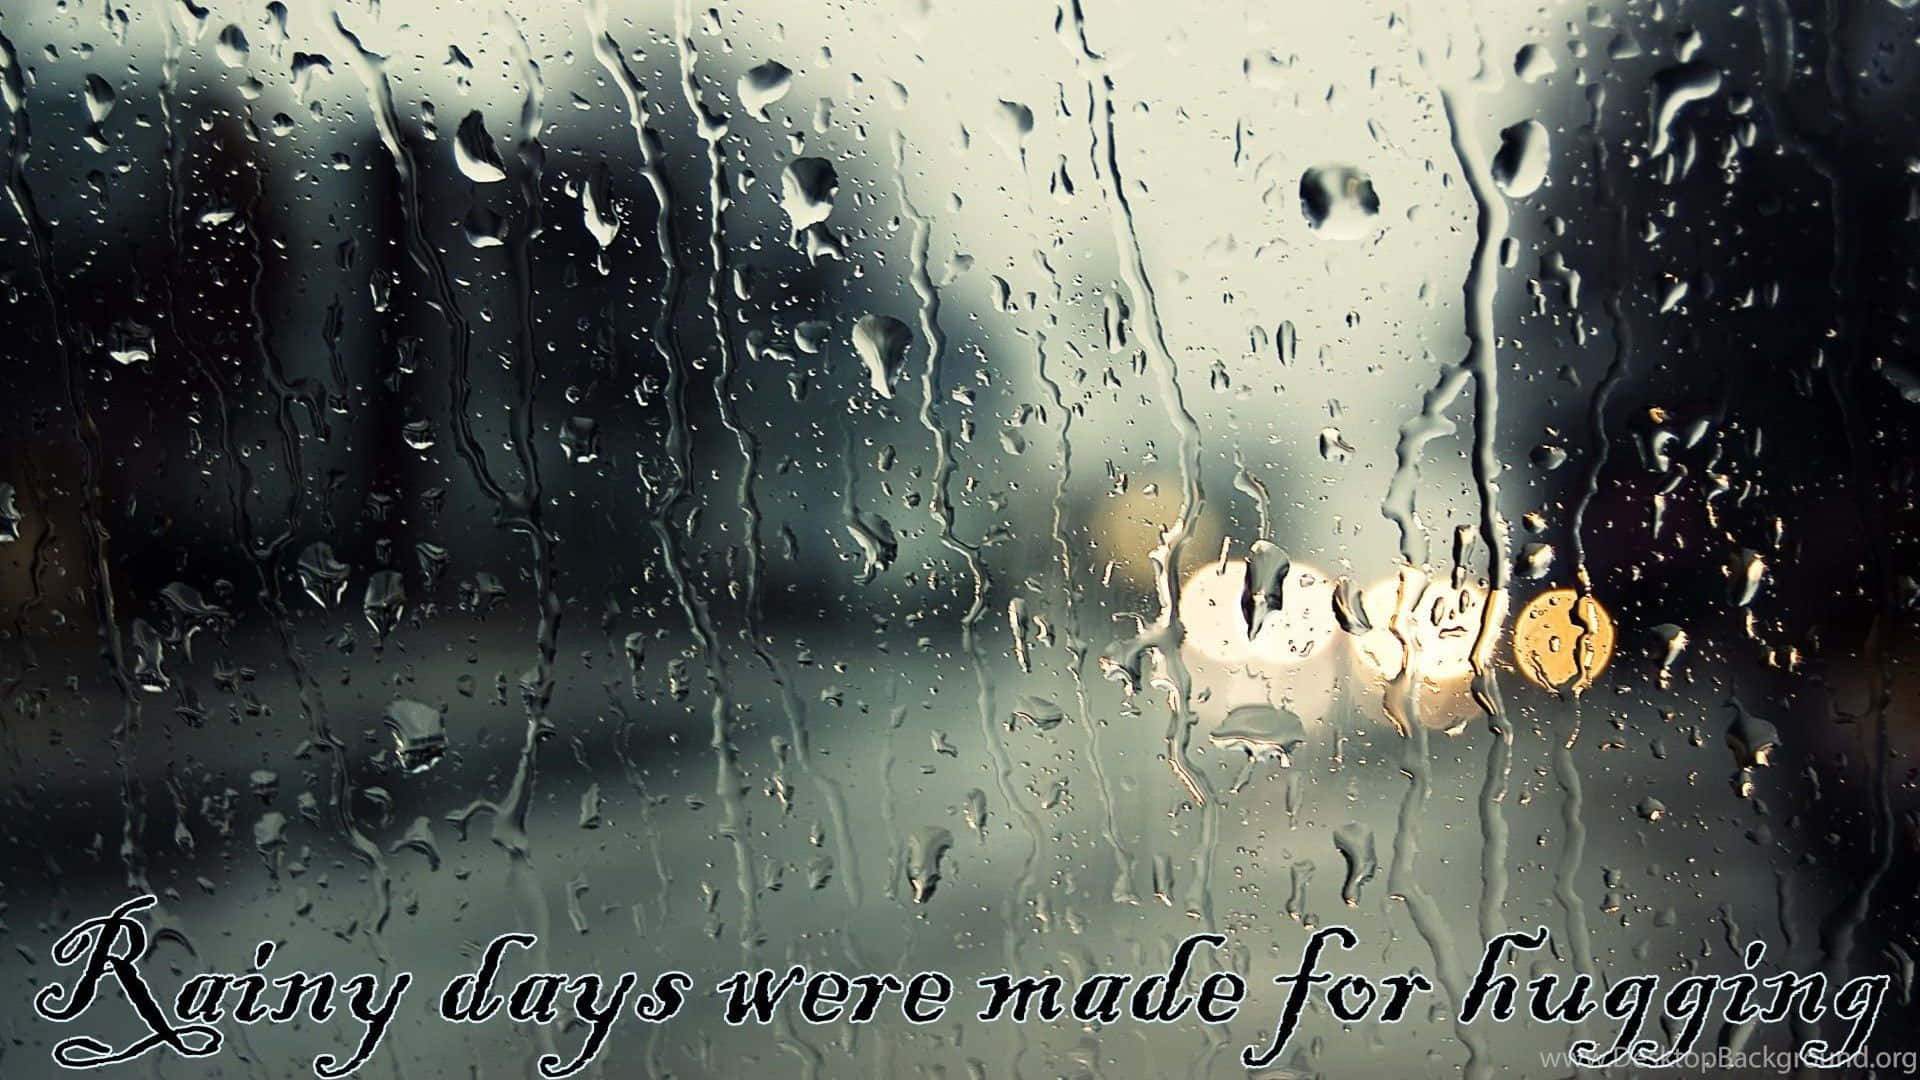 Enjoy the rainy day with inspiring quotes Wallpaper